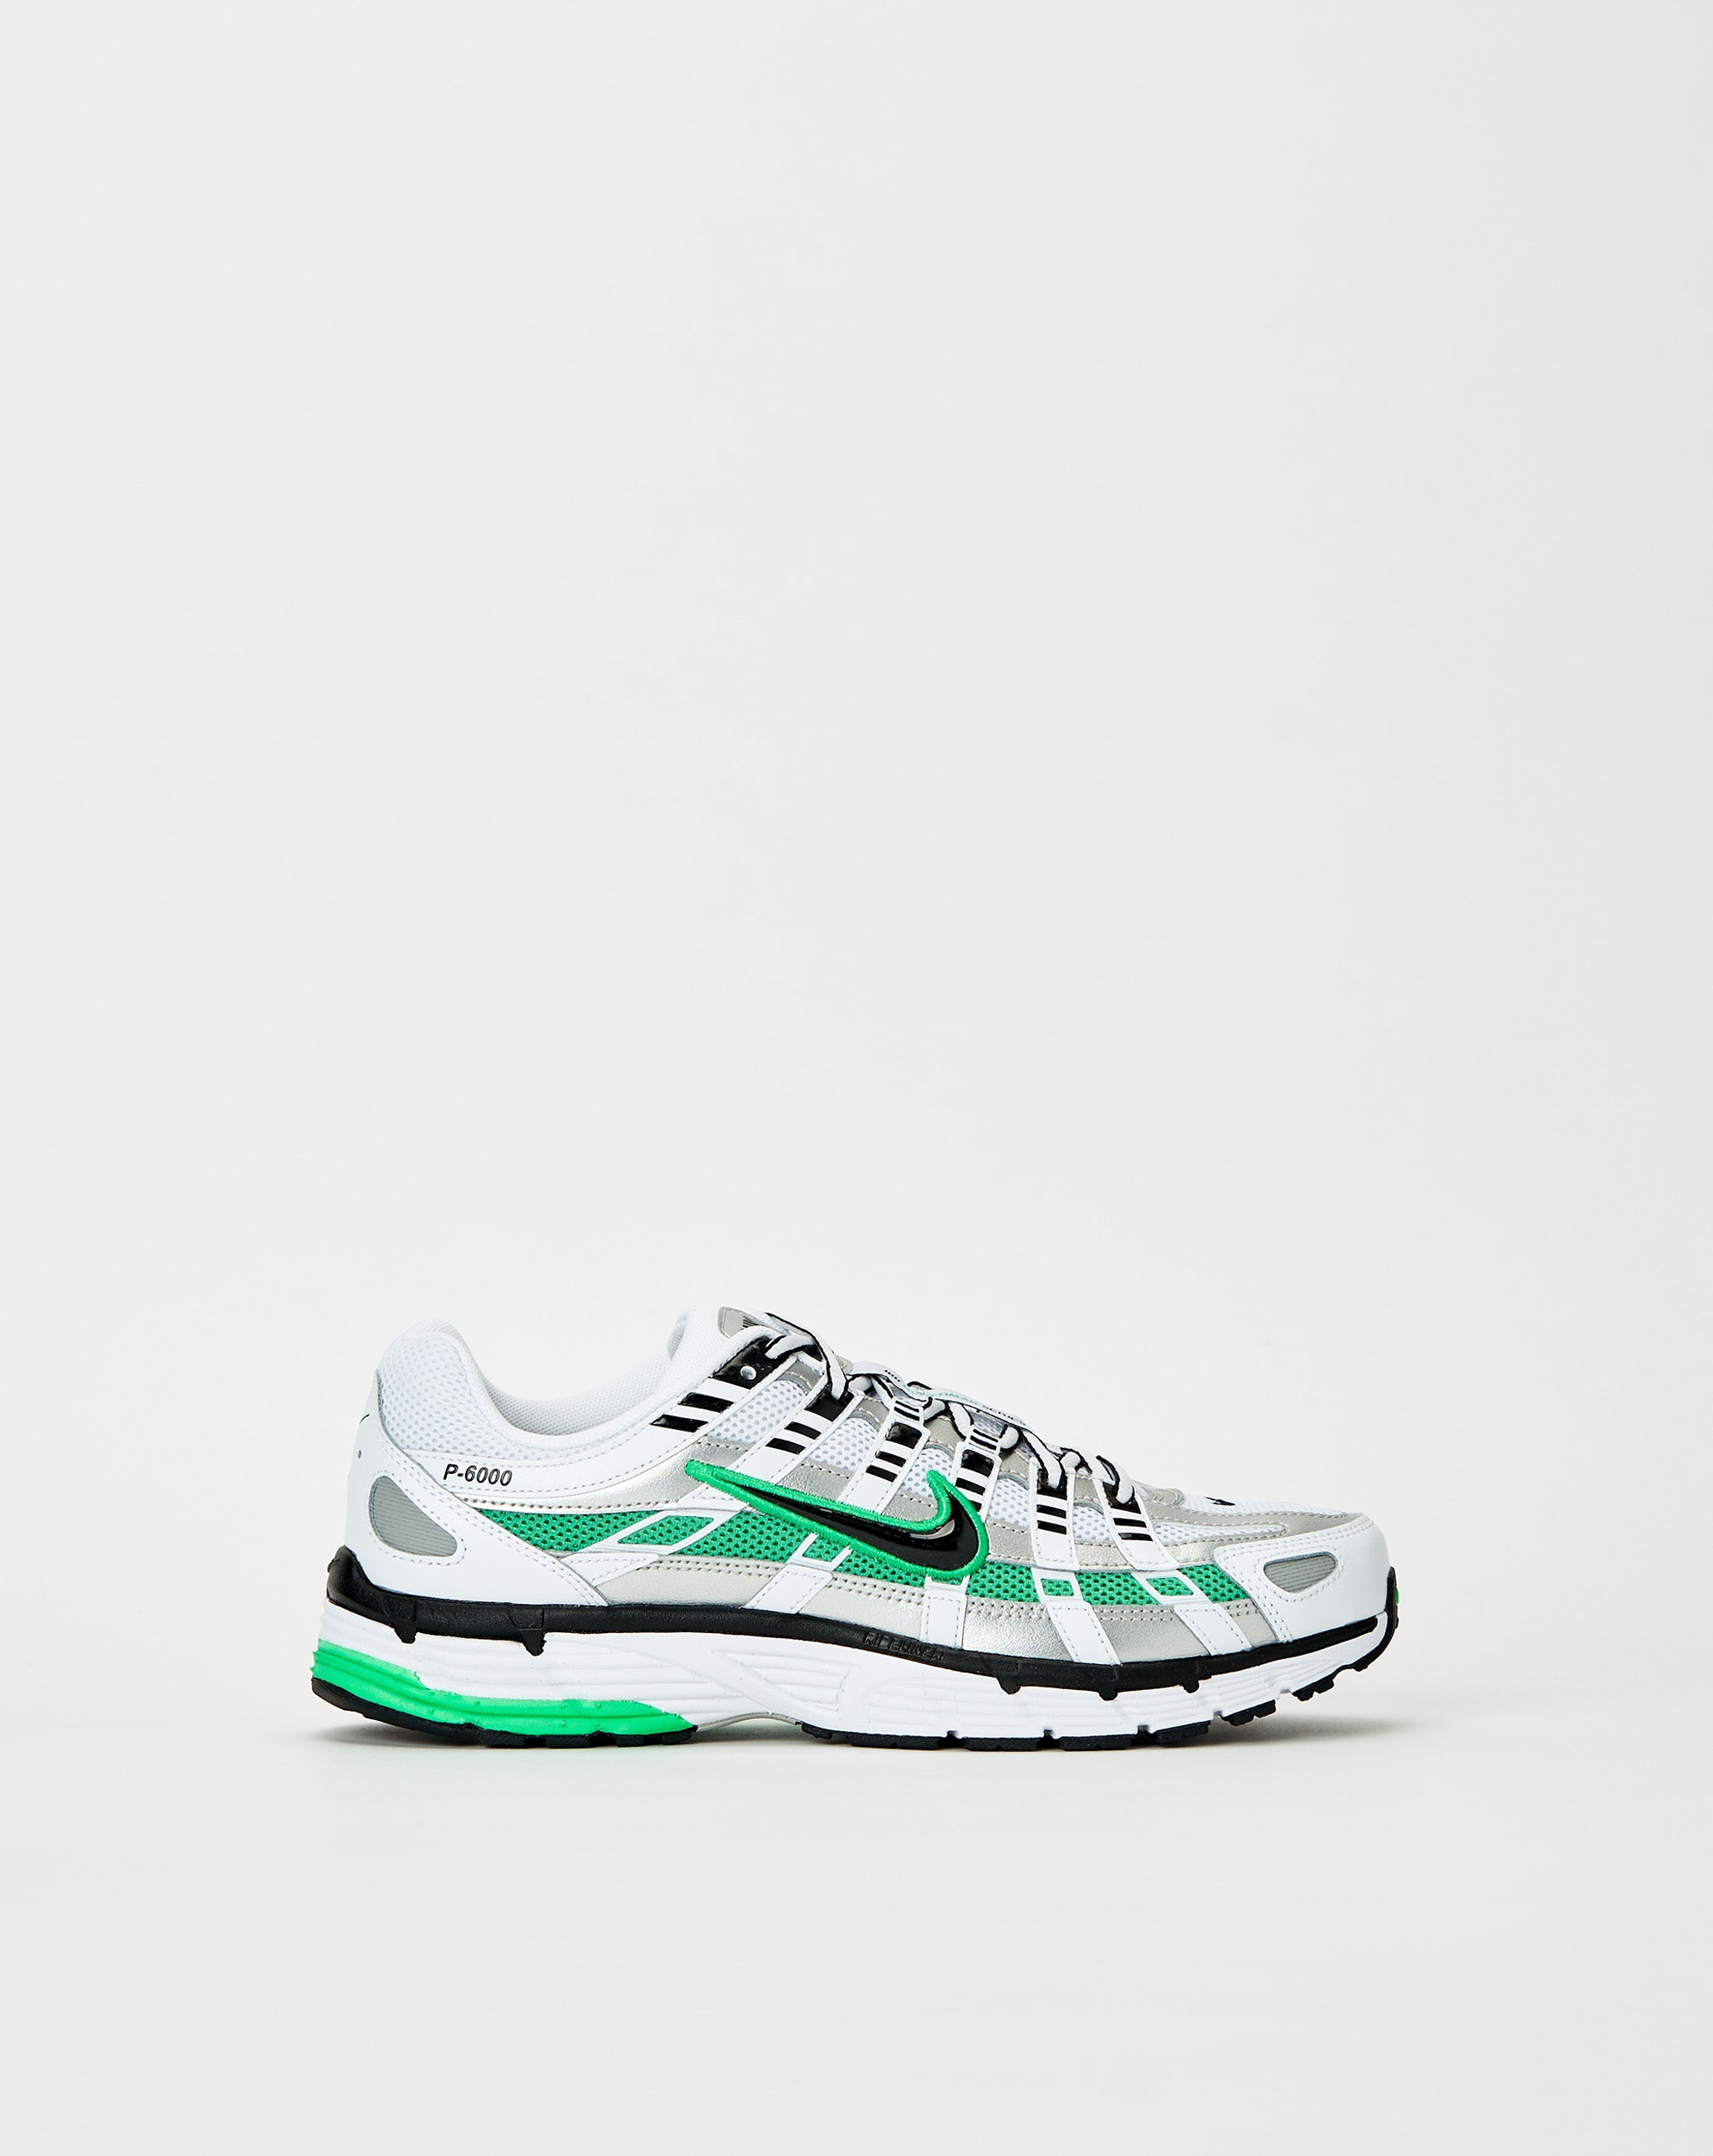 Sneakers and shoes adidas Originals ZX 4000 sale